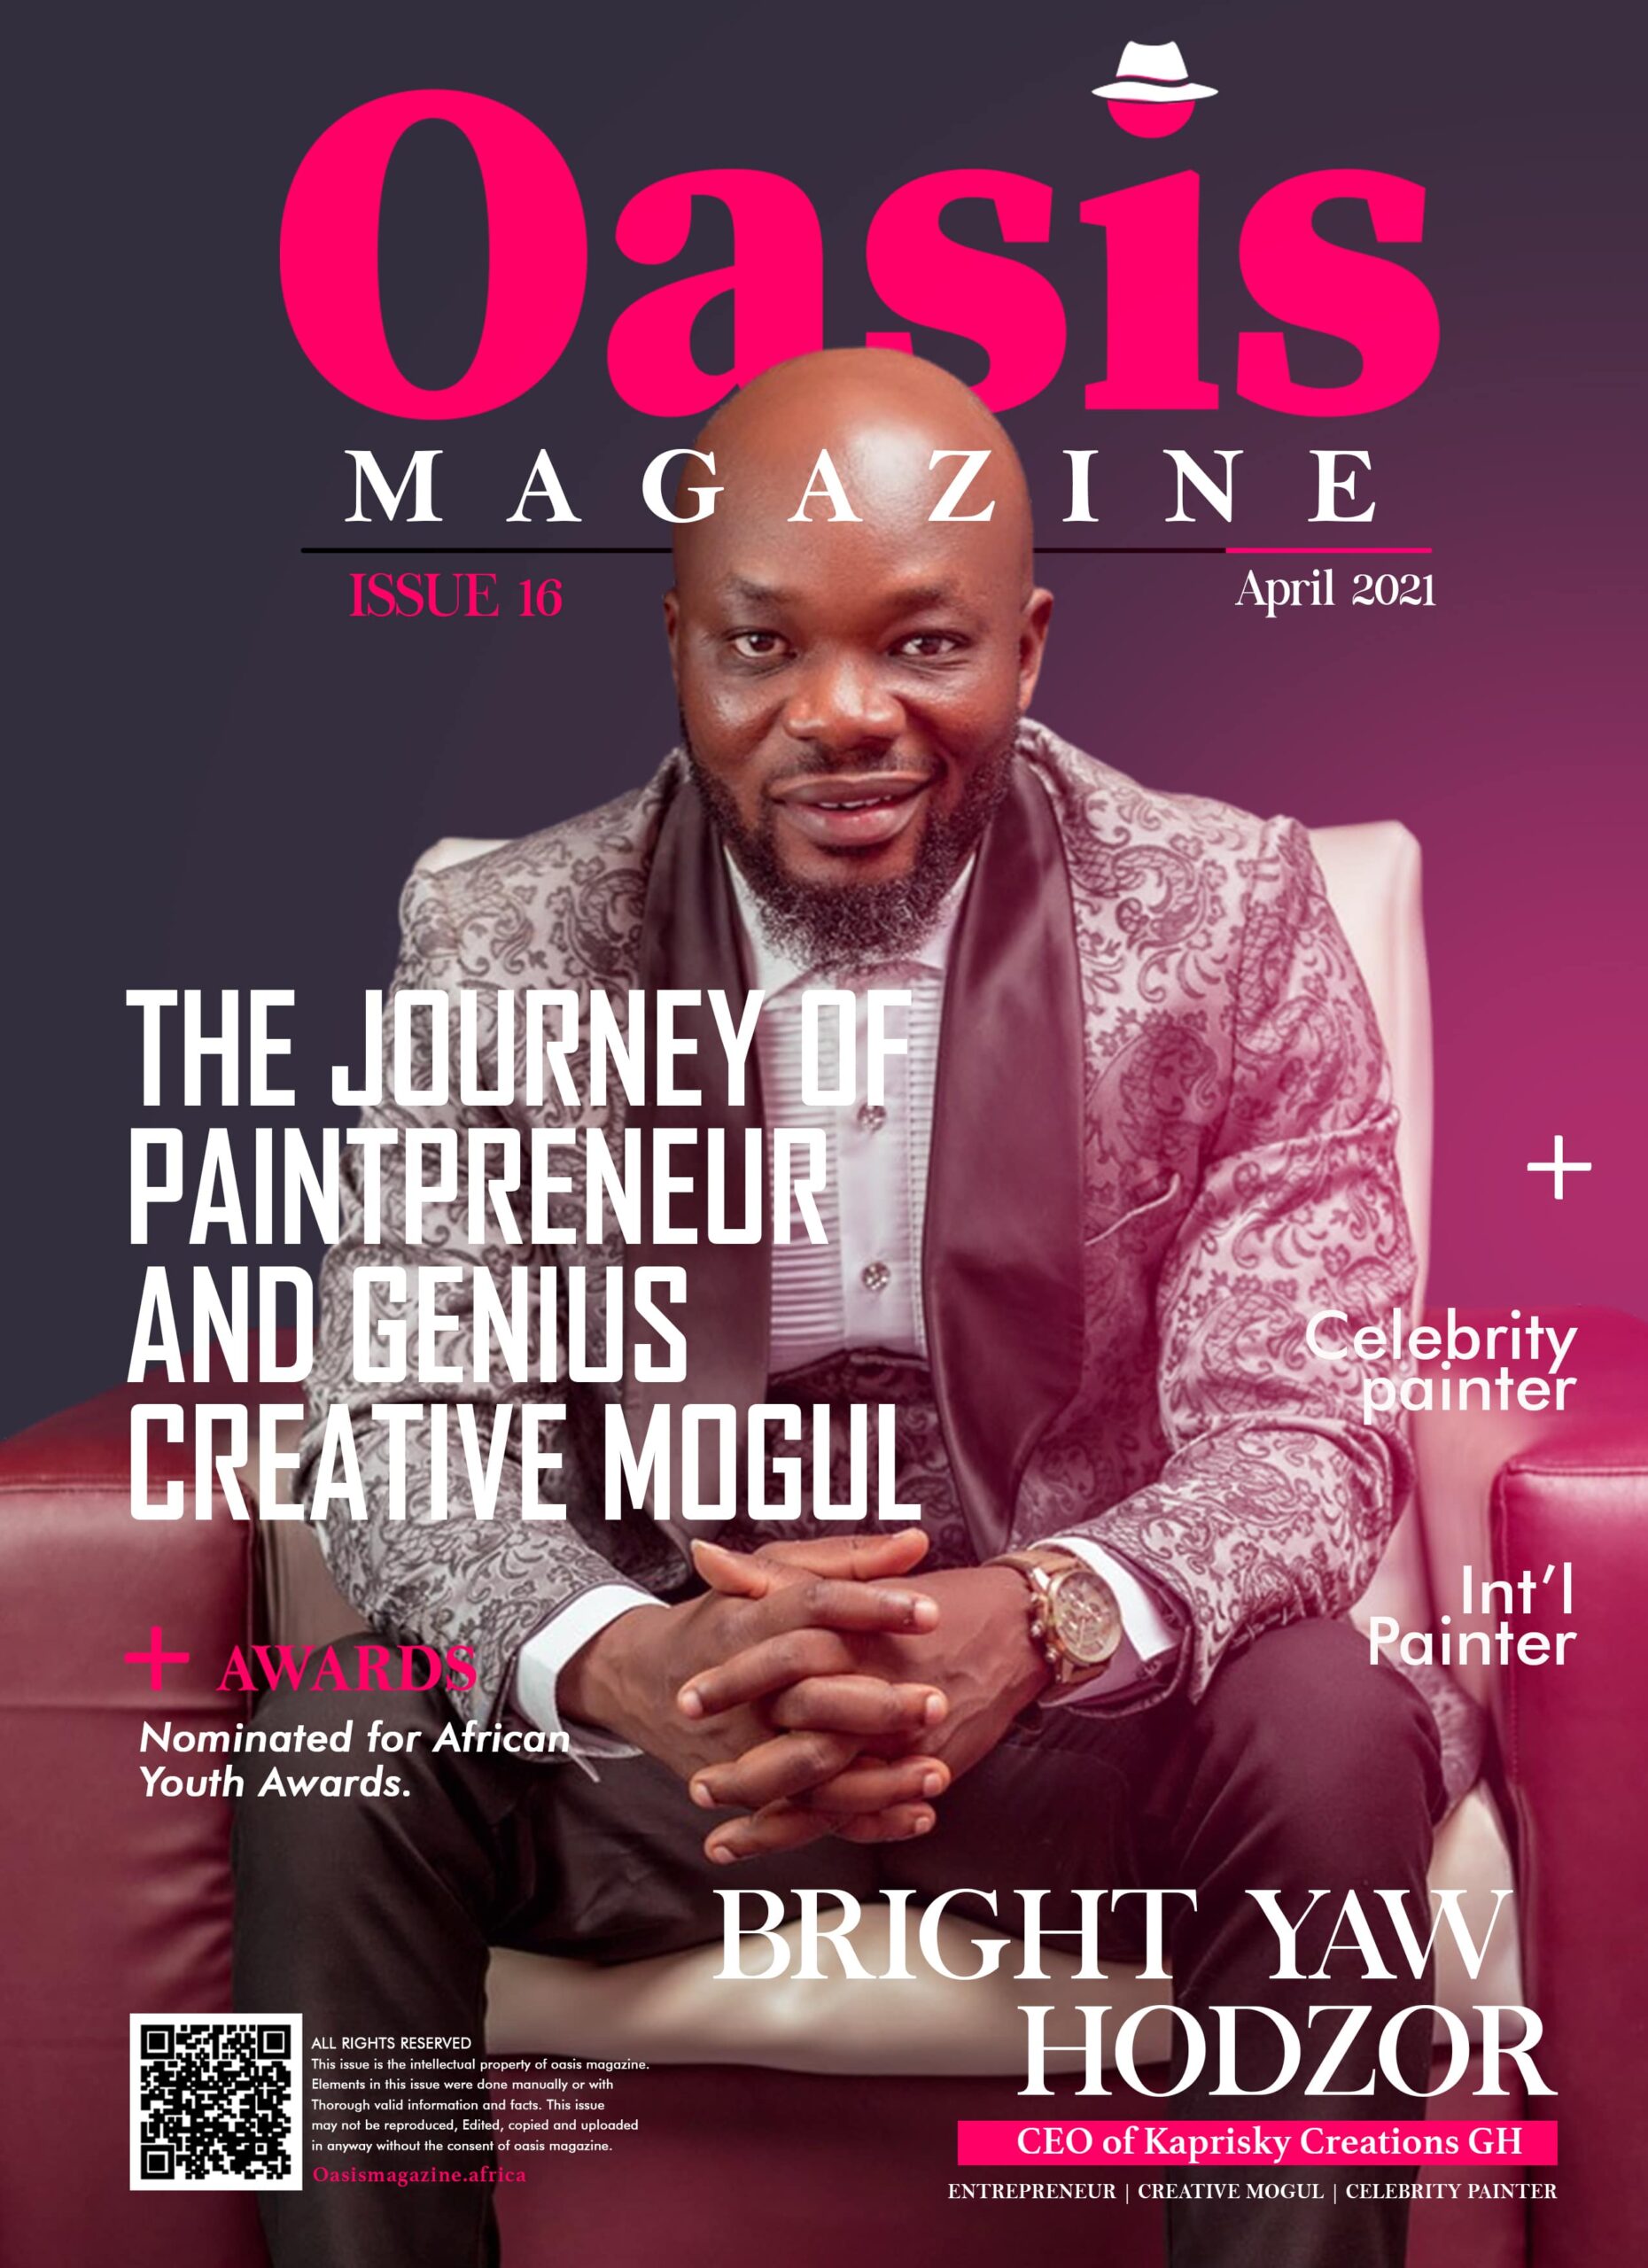 Bright Yaw Hodzor, the celebrity painter Covers Oasis Magazine’s April Edition